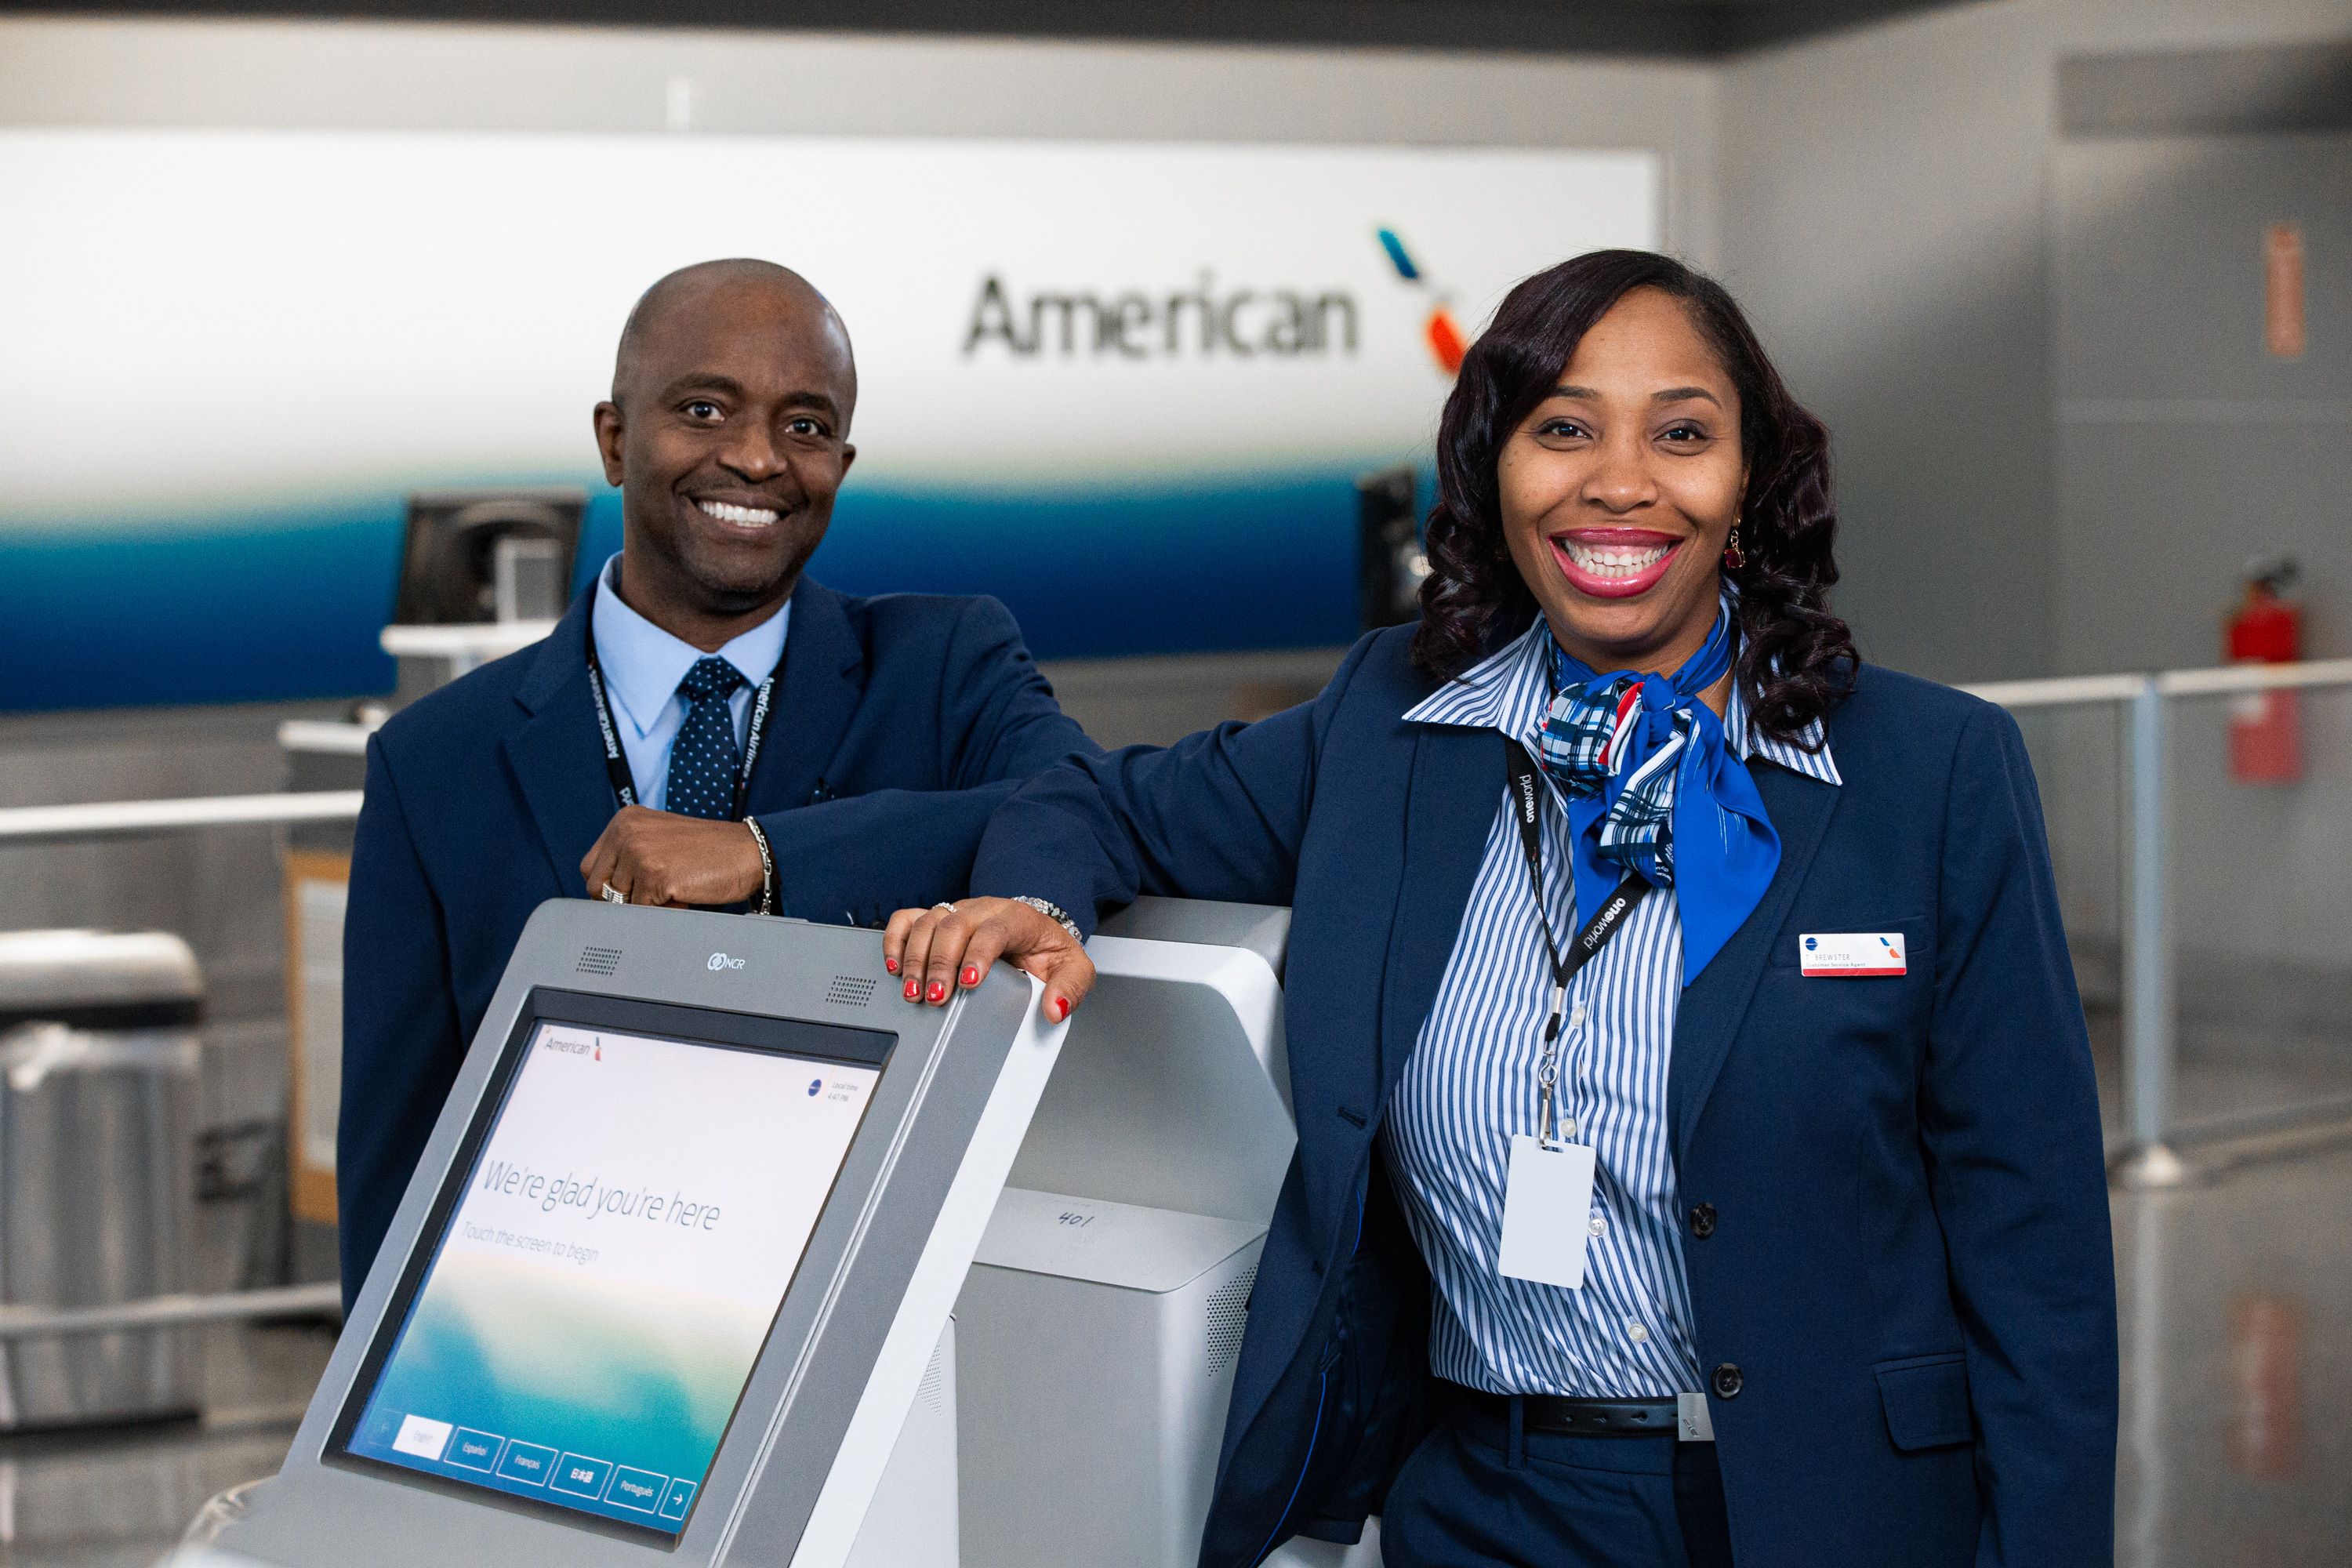 Gate agents at kiosk American Airlines